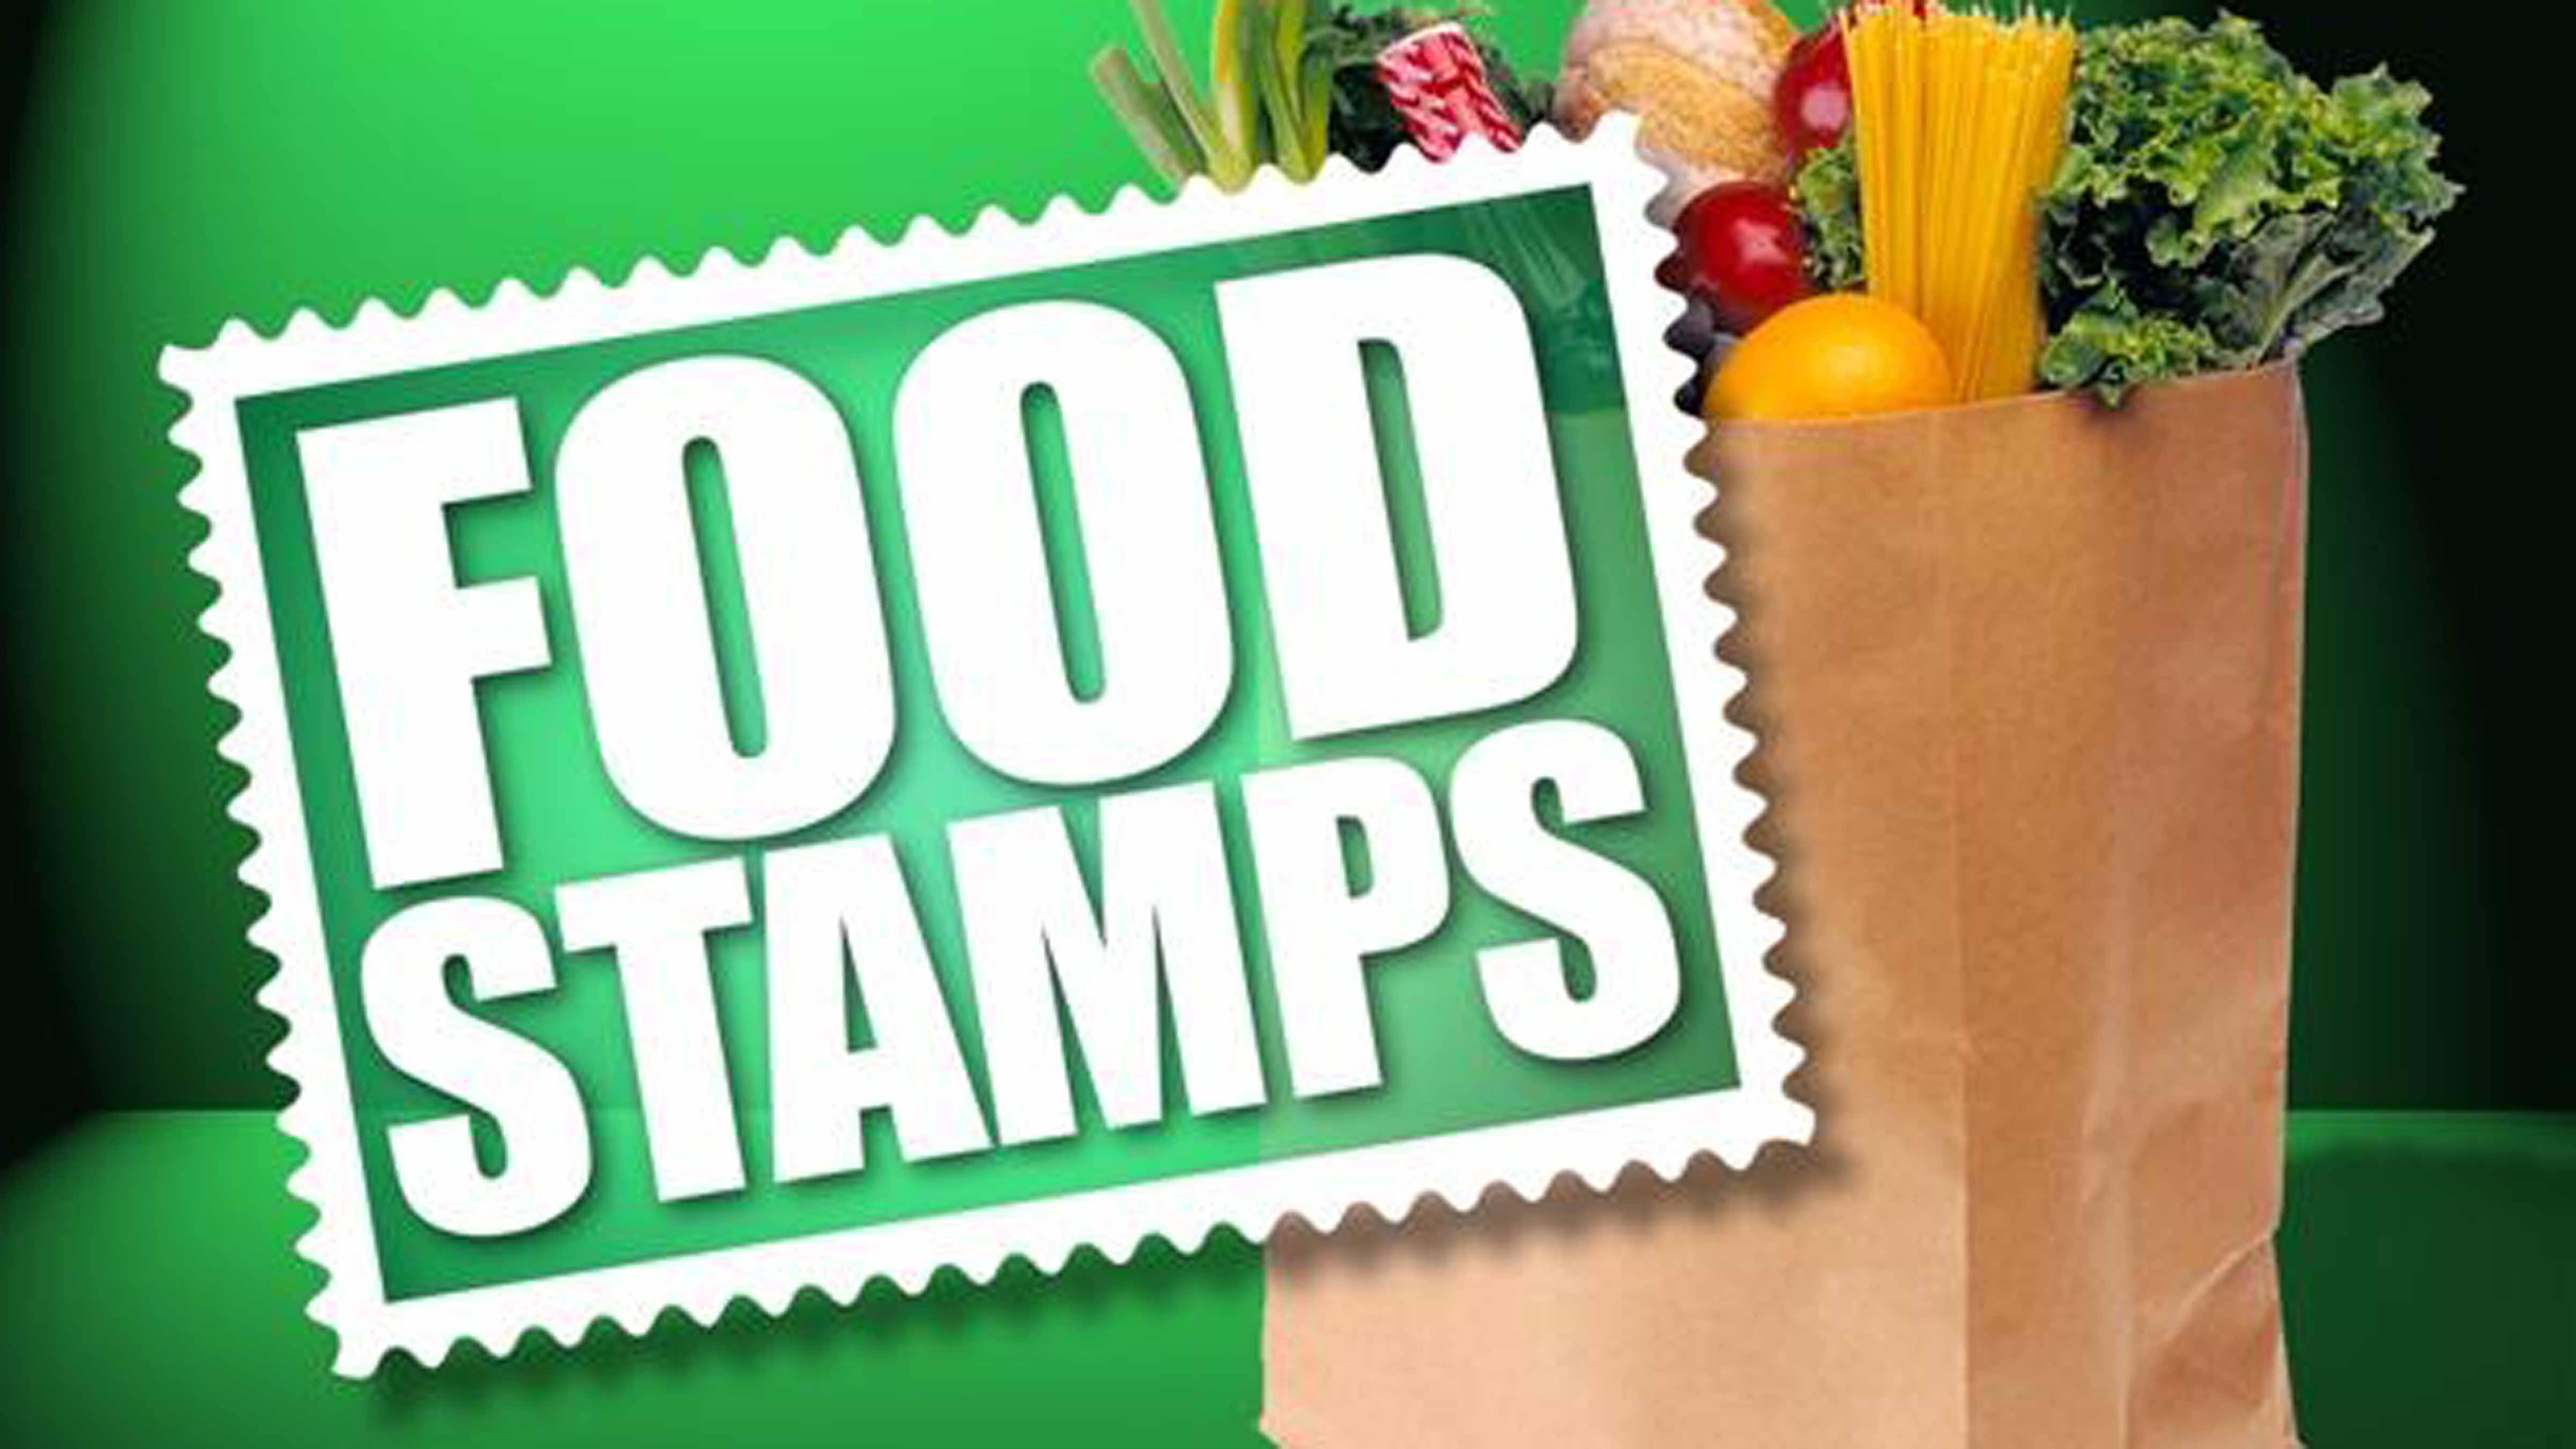 food-stamps_edited-1